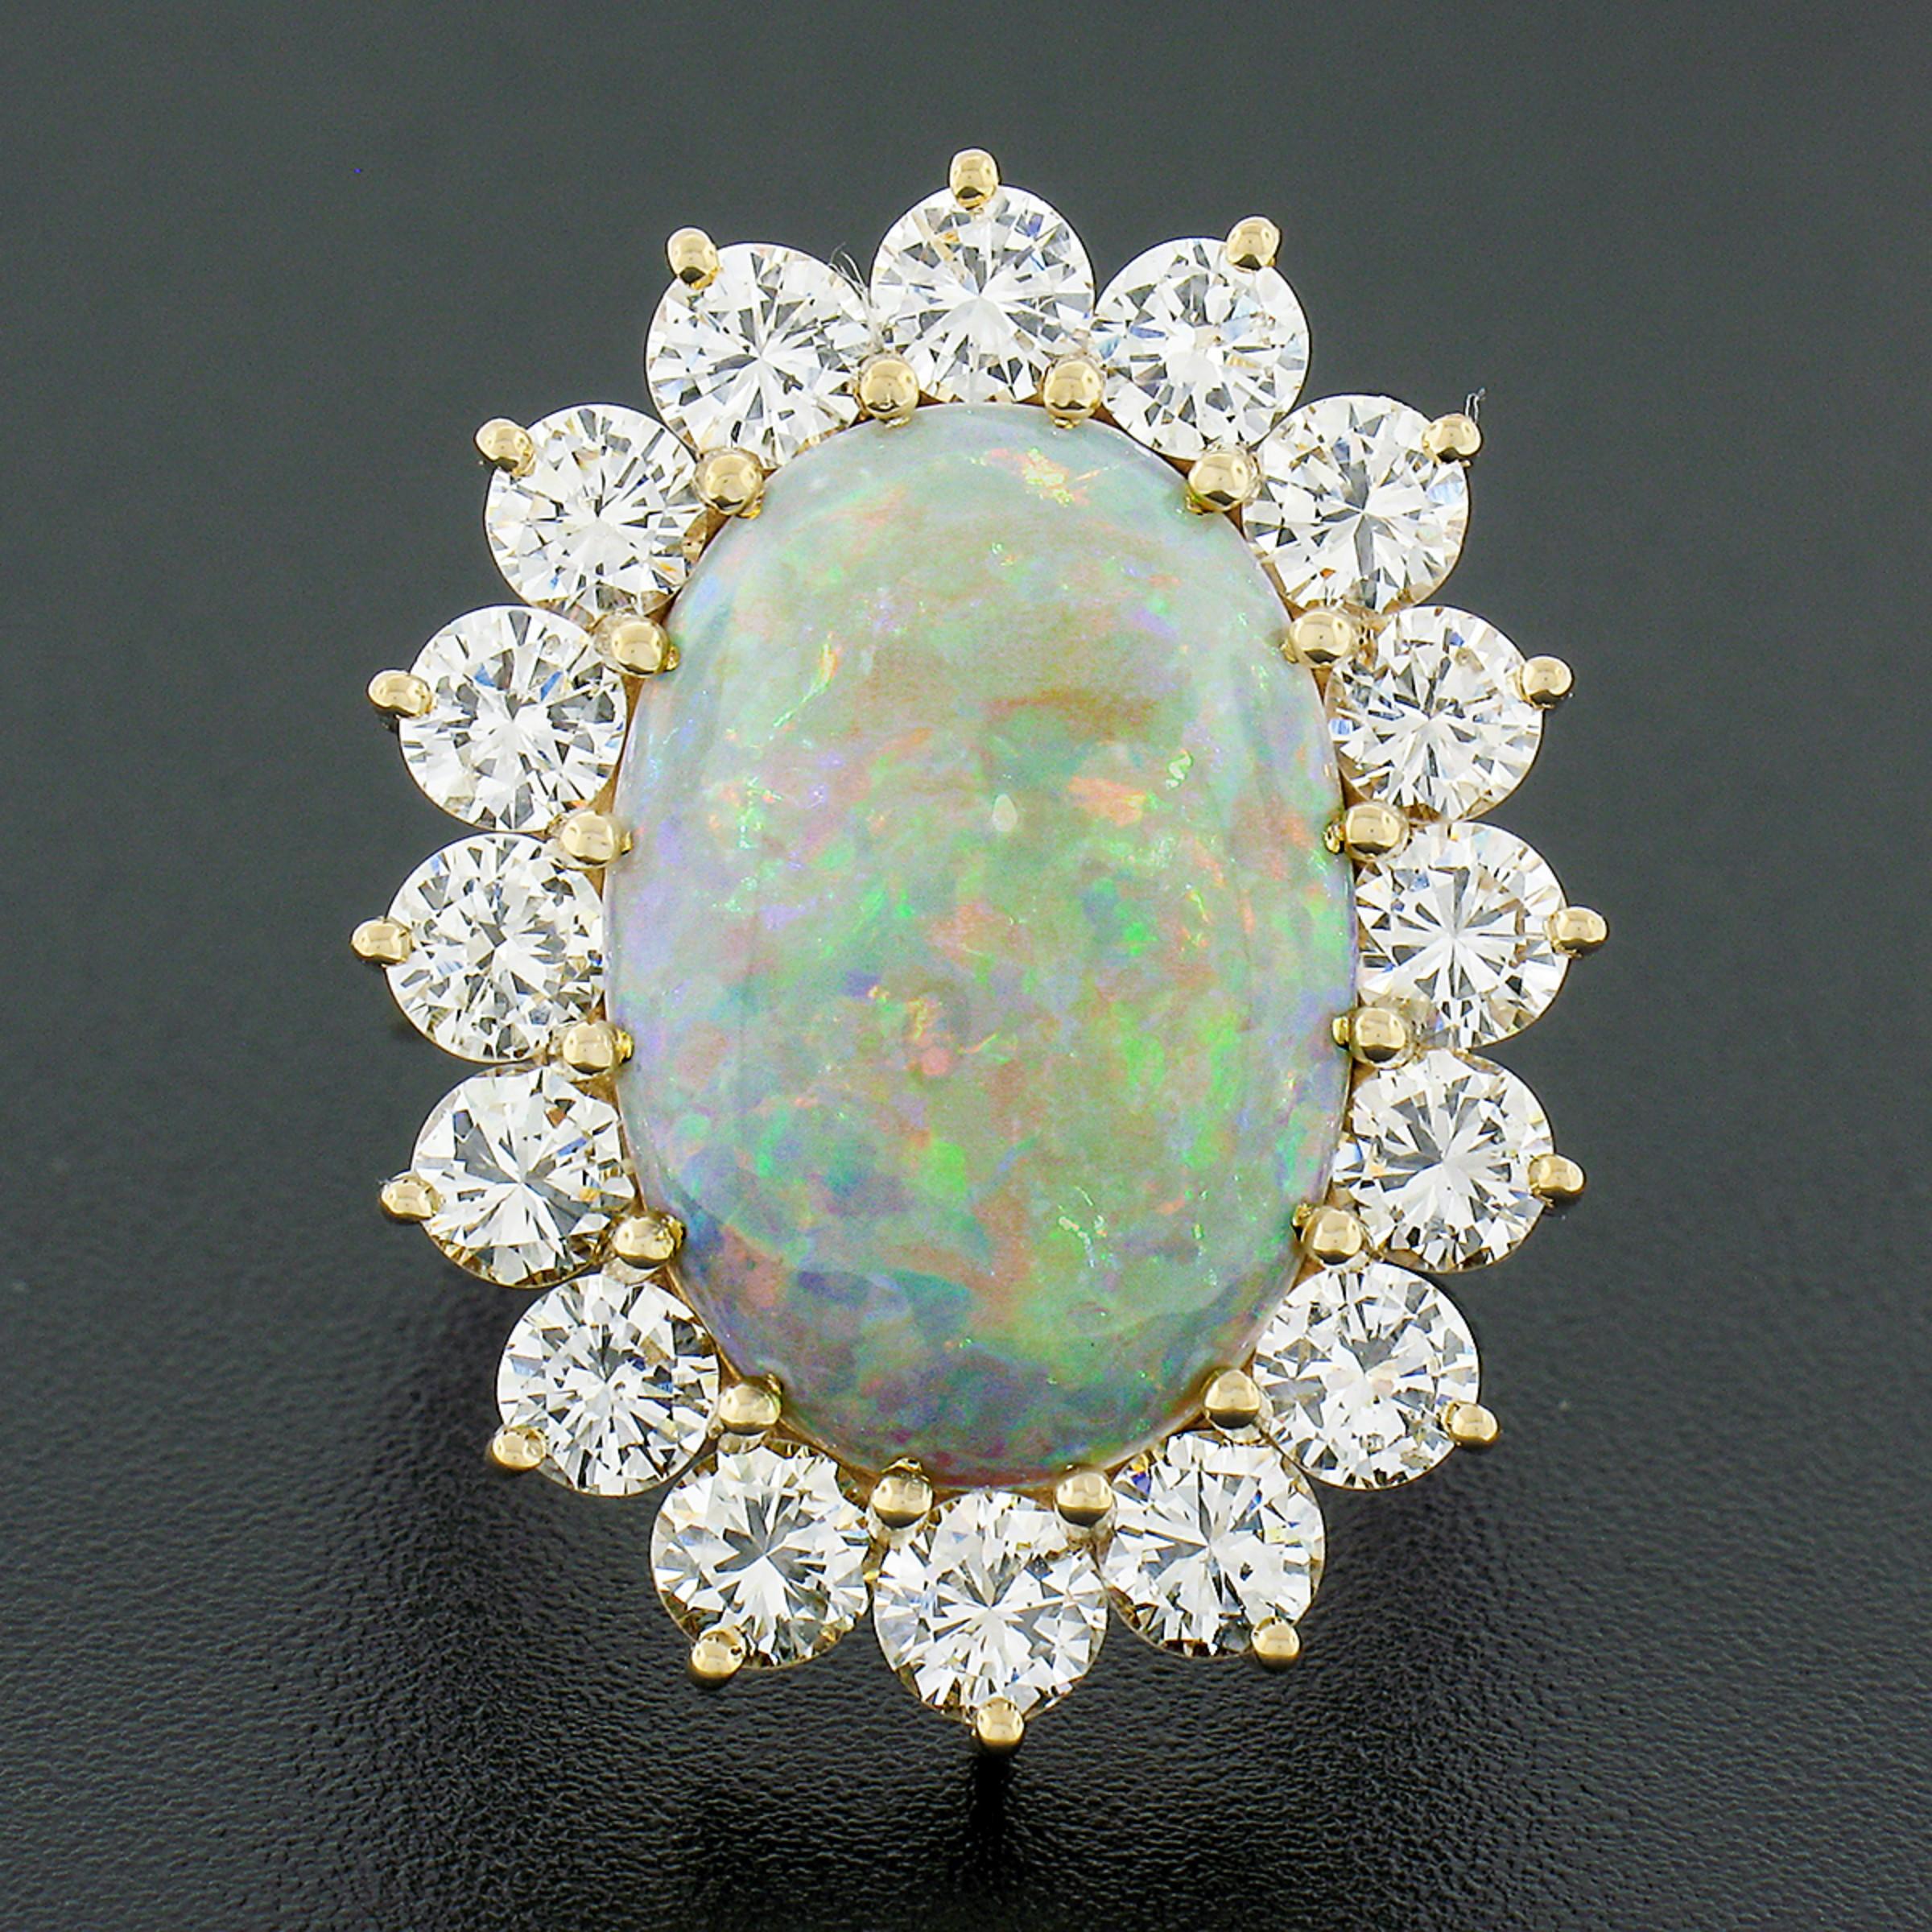 This magnificent fancy vintage ring is crafted in solid 14k yellow gold and features a breathtaking opal gemstone neatly and elegantly multi-prong set at the center of stunning halo design. The white opal is in excellent condition, has NO CRAZING,